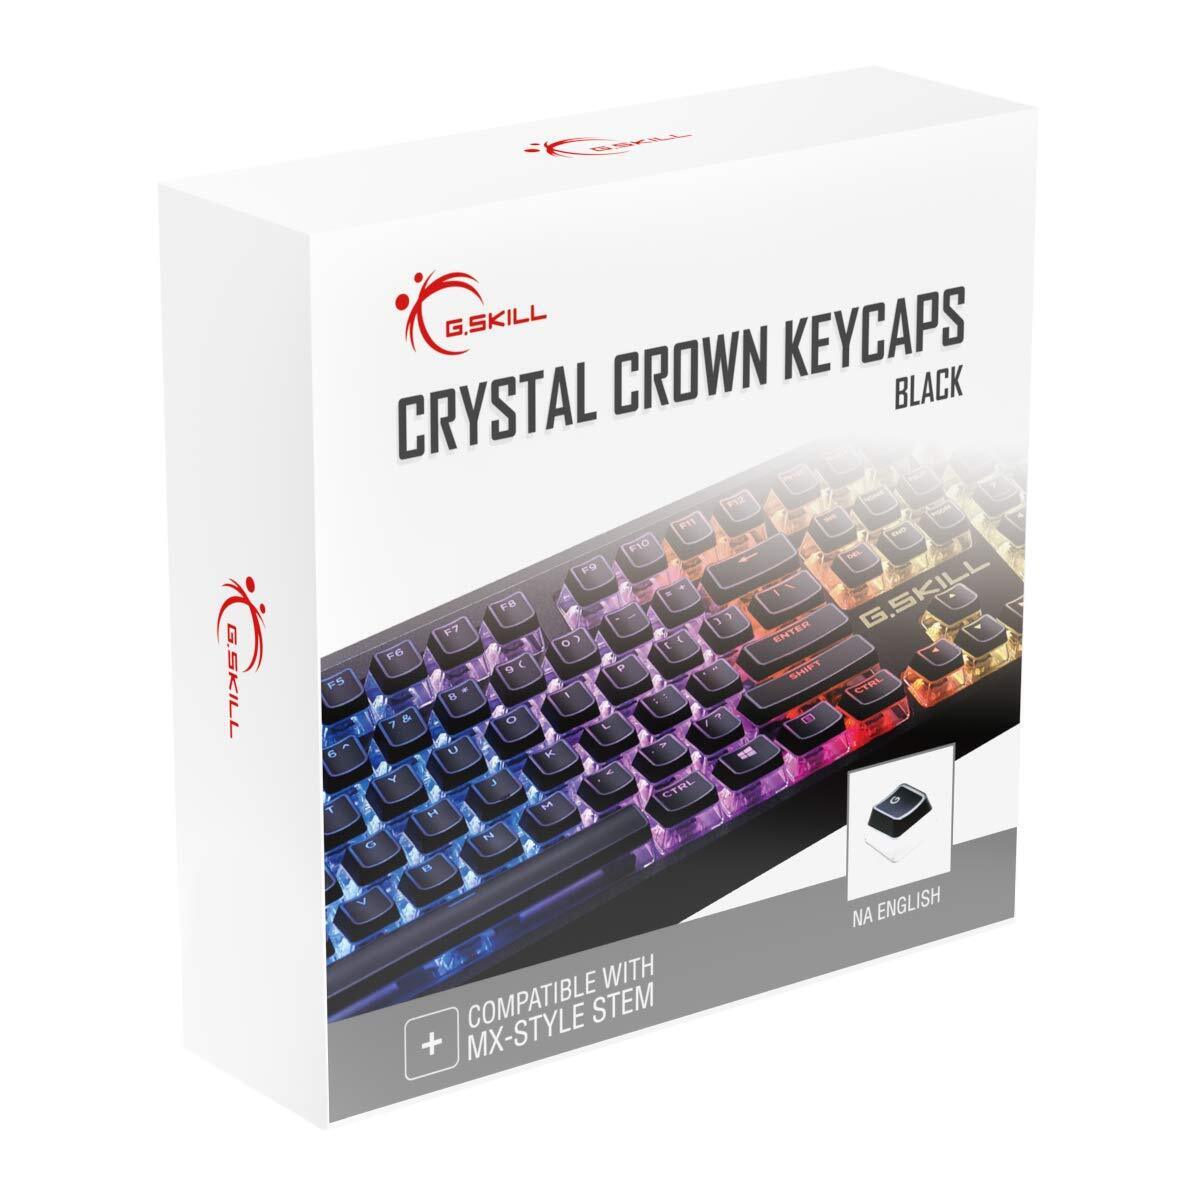 G.SKILL Crystal Crown Keycaps - Keycap Set with Transparent Layer for Mechanical